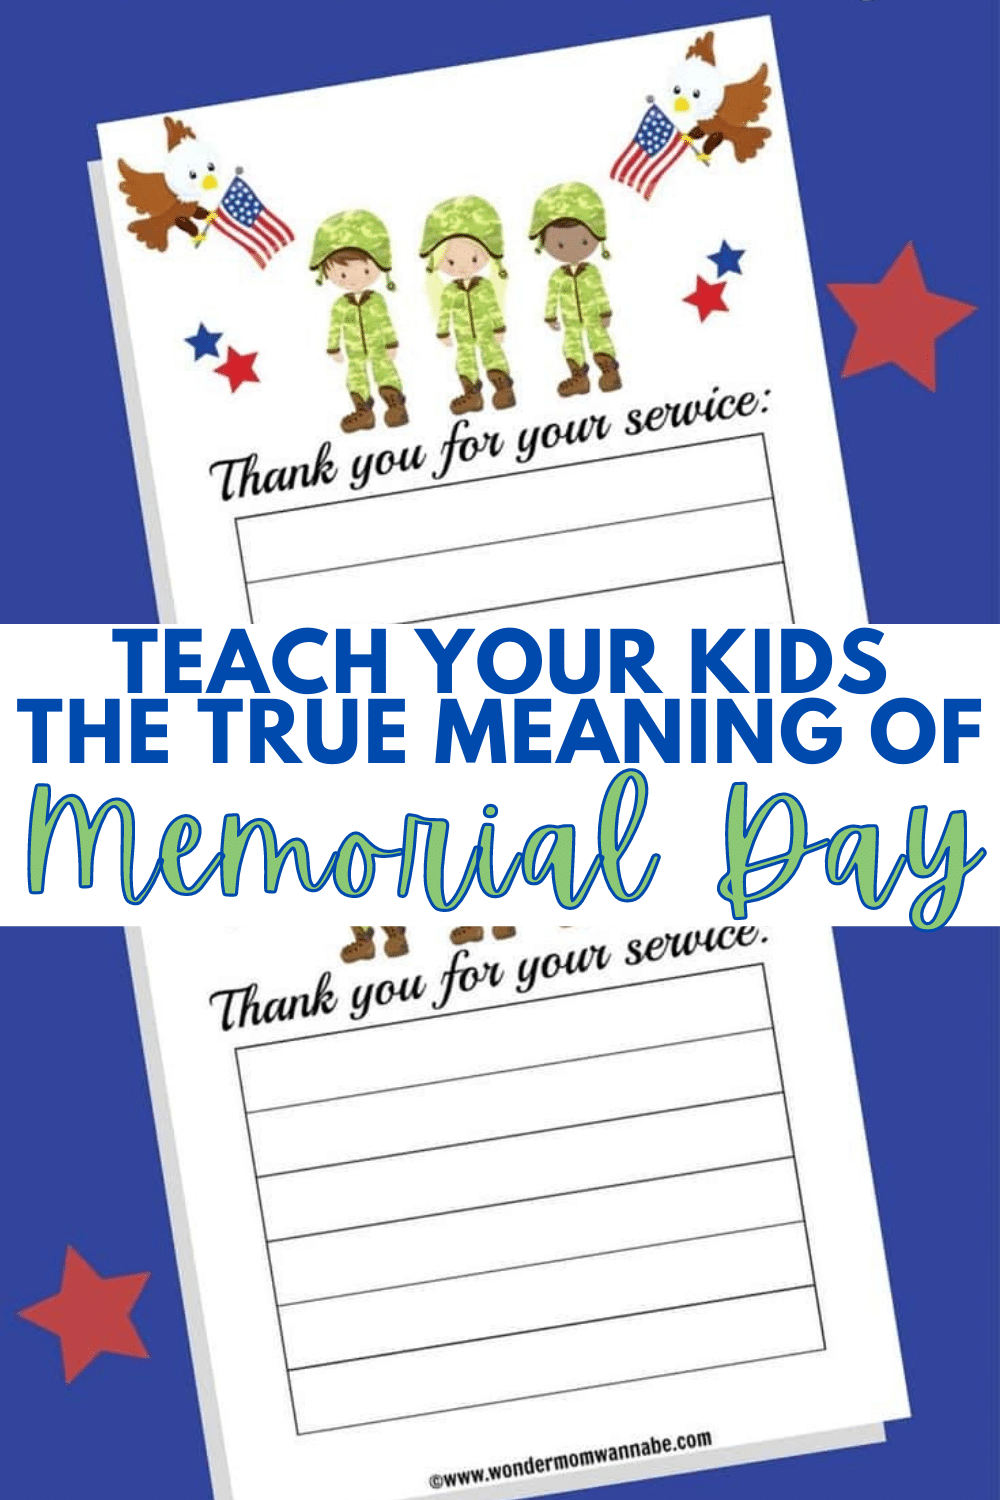 Simple and meaningful ways to teach your kids the true meaning of Memorial Day to honor our fallen heroes. #memorialday #forkids #kidsactivities via @wondermomwannab